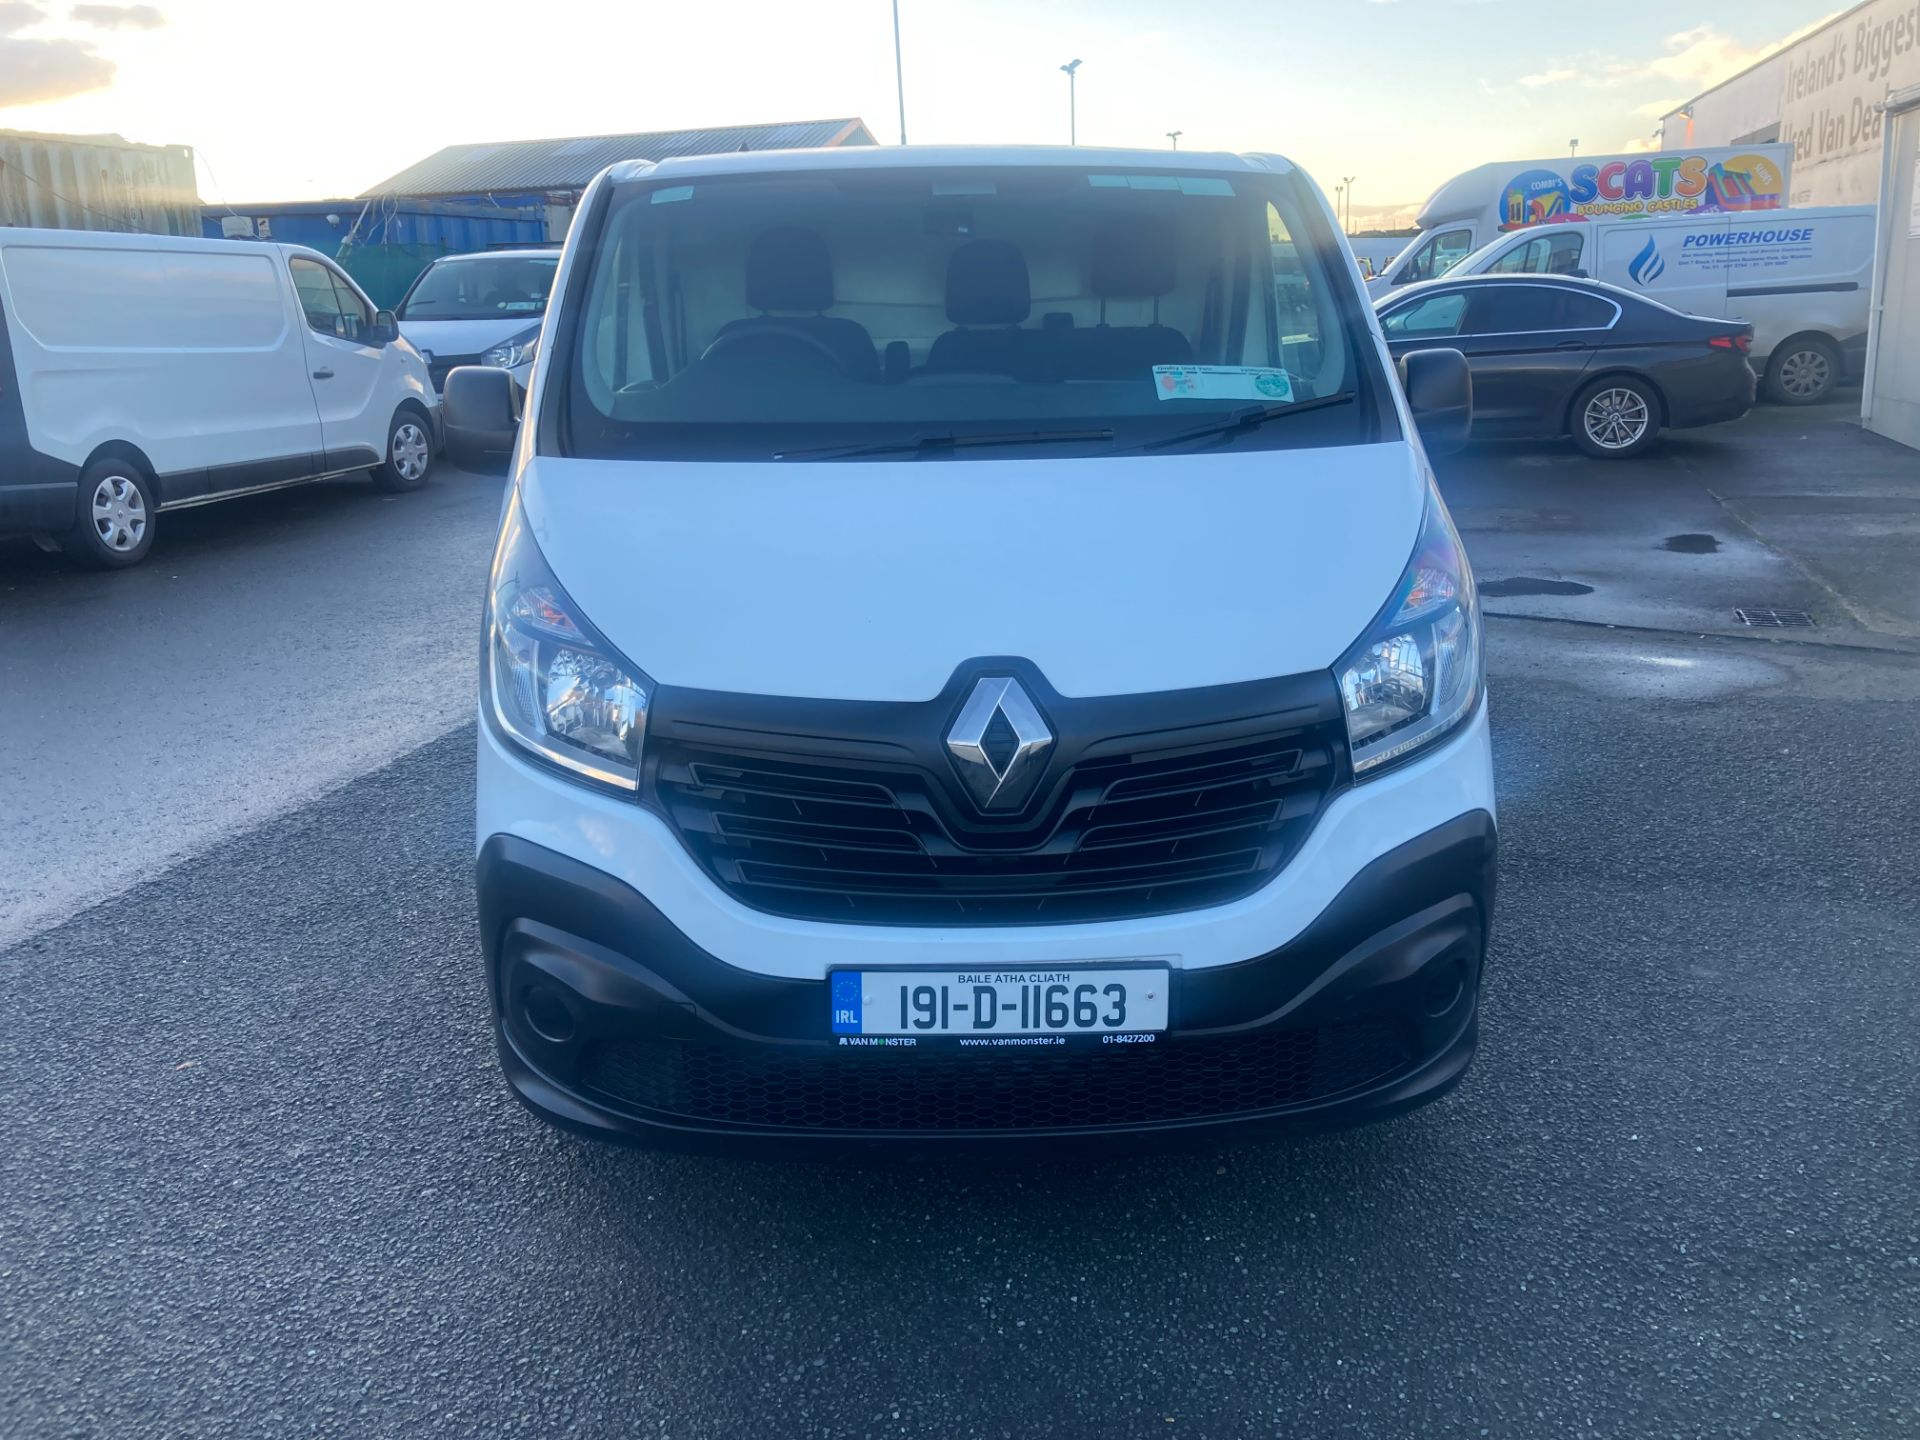 2019 Renault Trafic LL29 DCI 120 Business (191D11663) Image 2